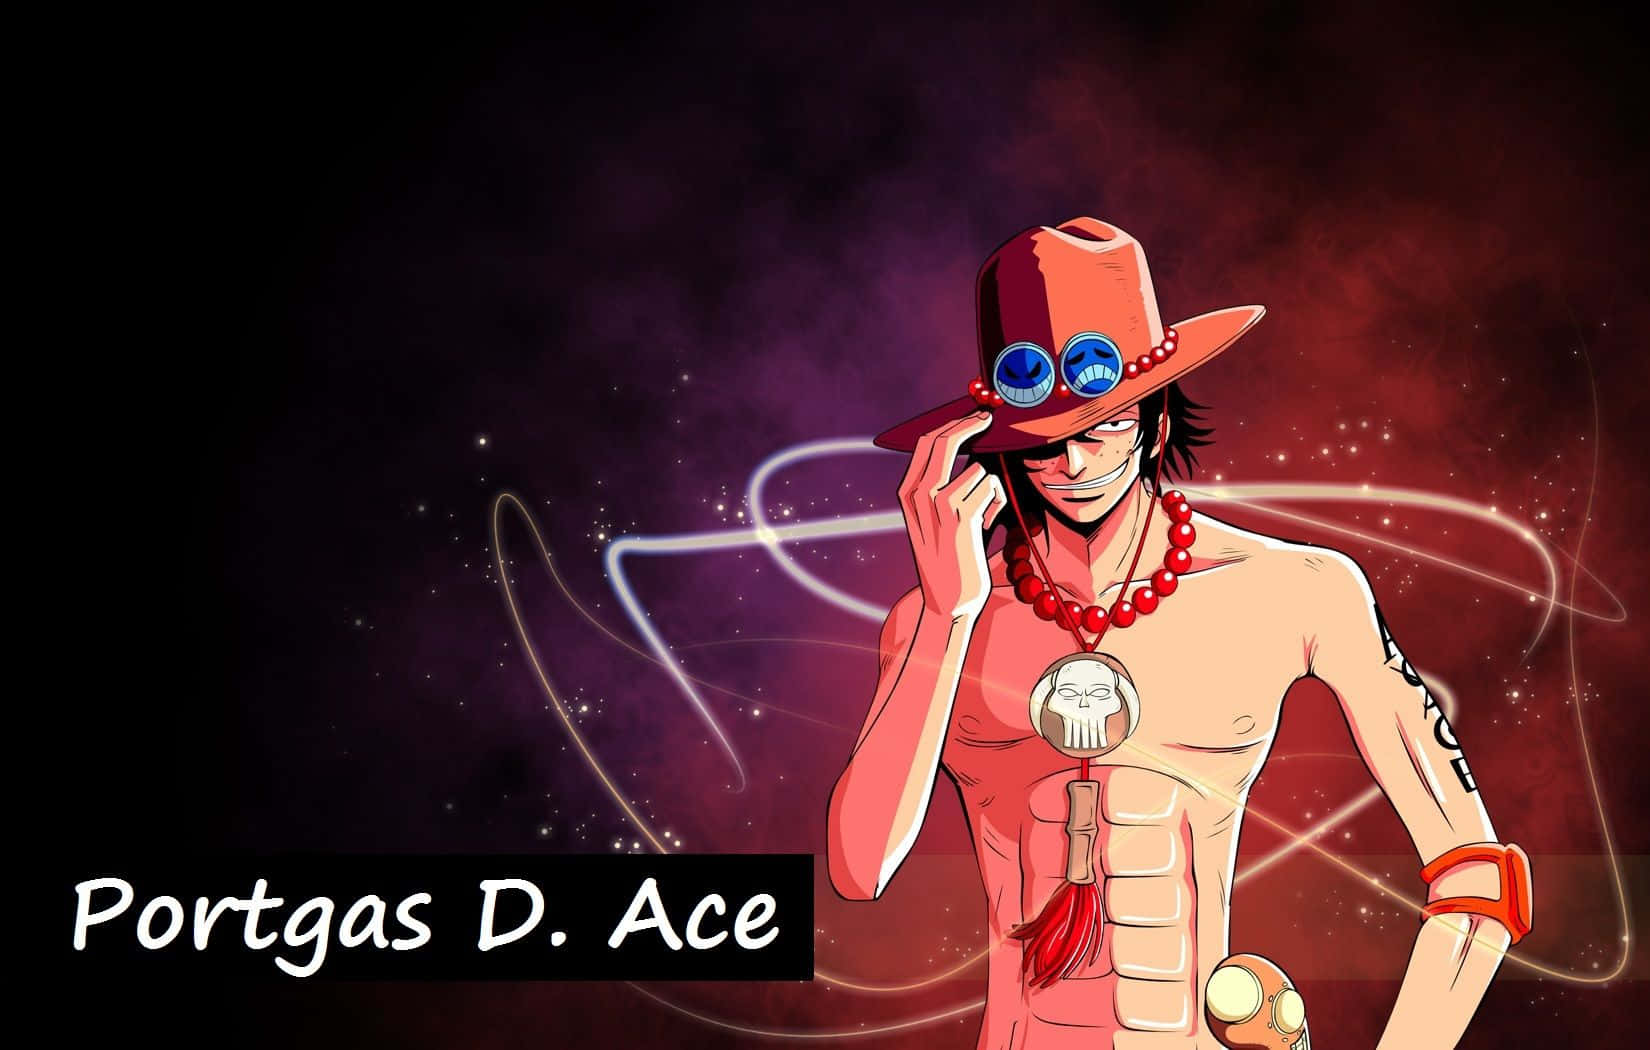 Take Command - The Fiery Portgas D. Ace Background